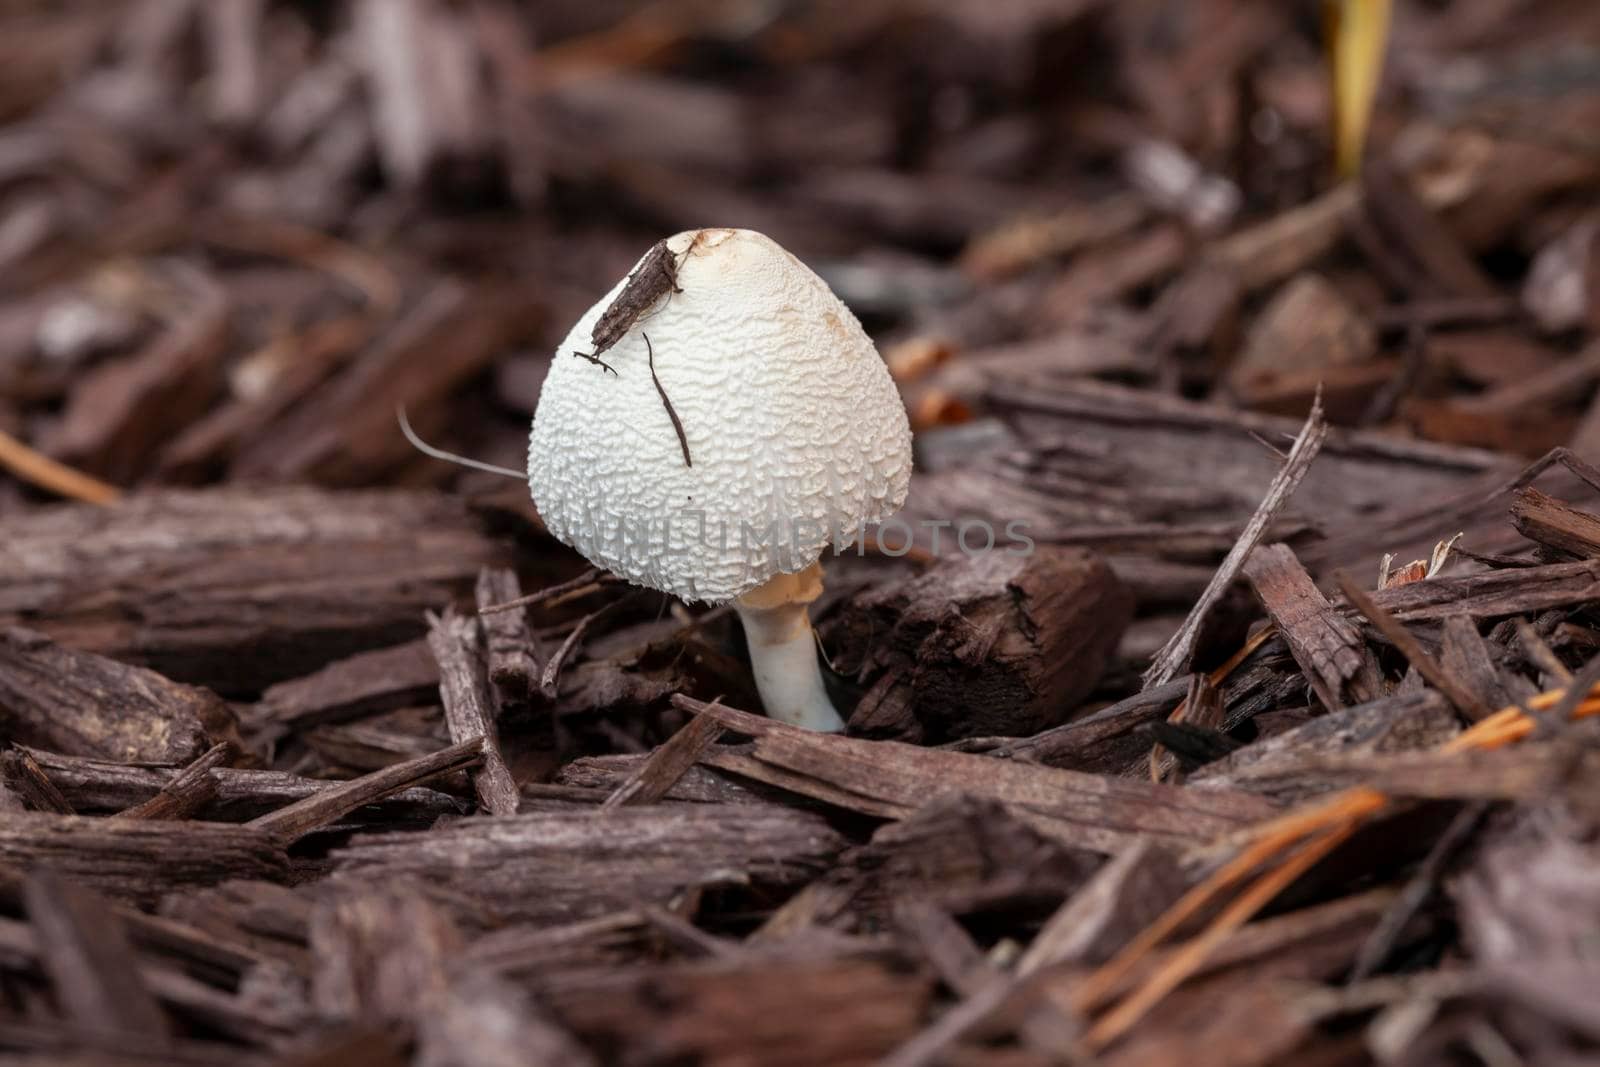 A white mushroom growing in the garden surrounded by bark chips by WittkePhotos